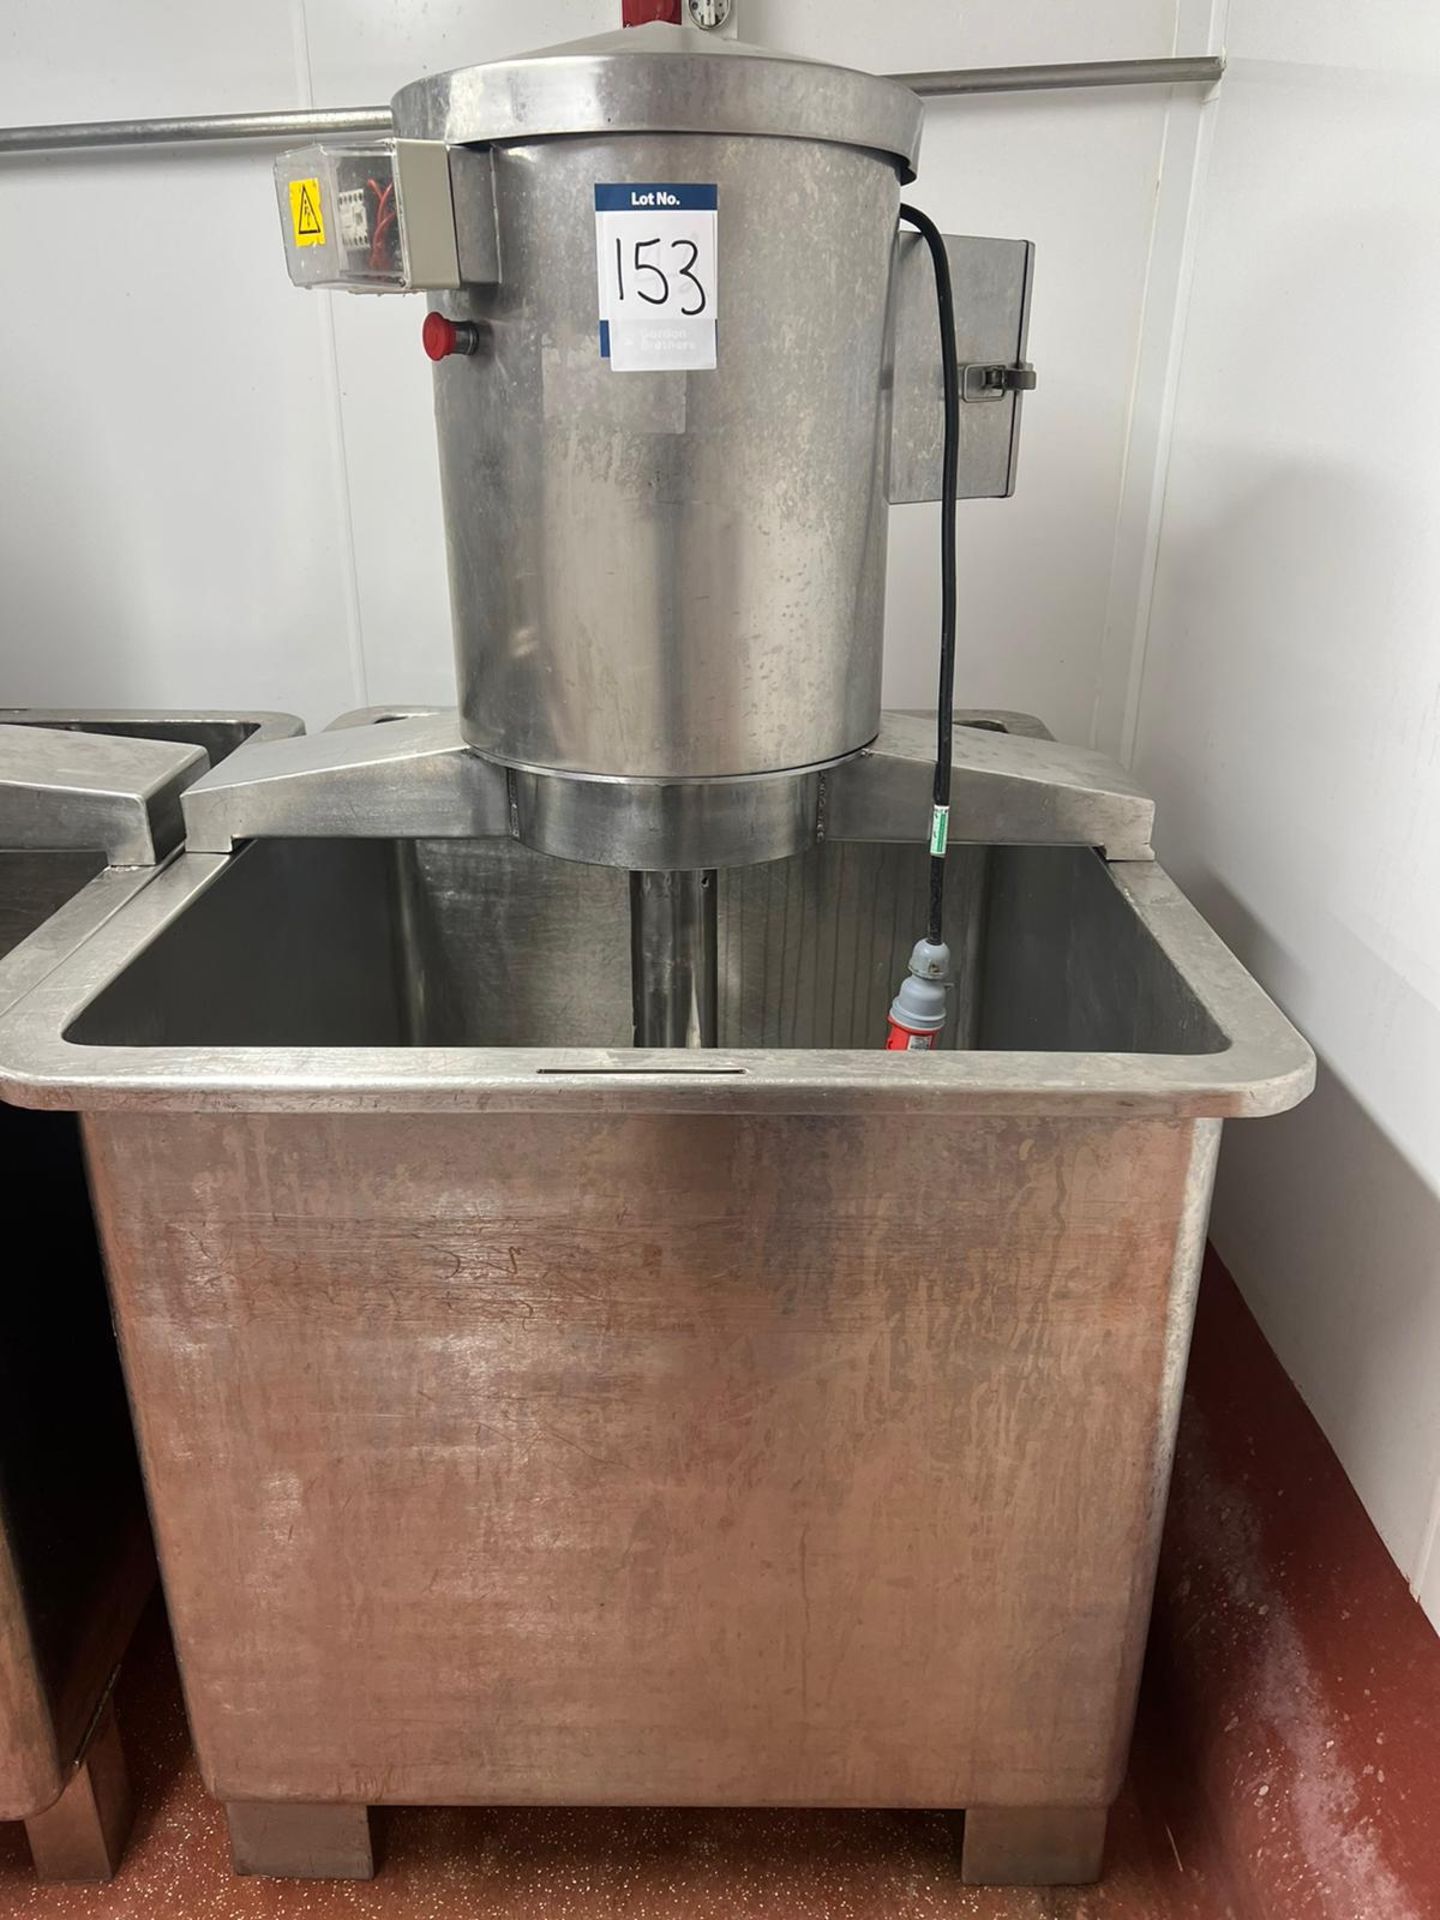 STAINLESS STEEL PADDLE MIXER